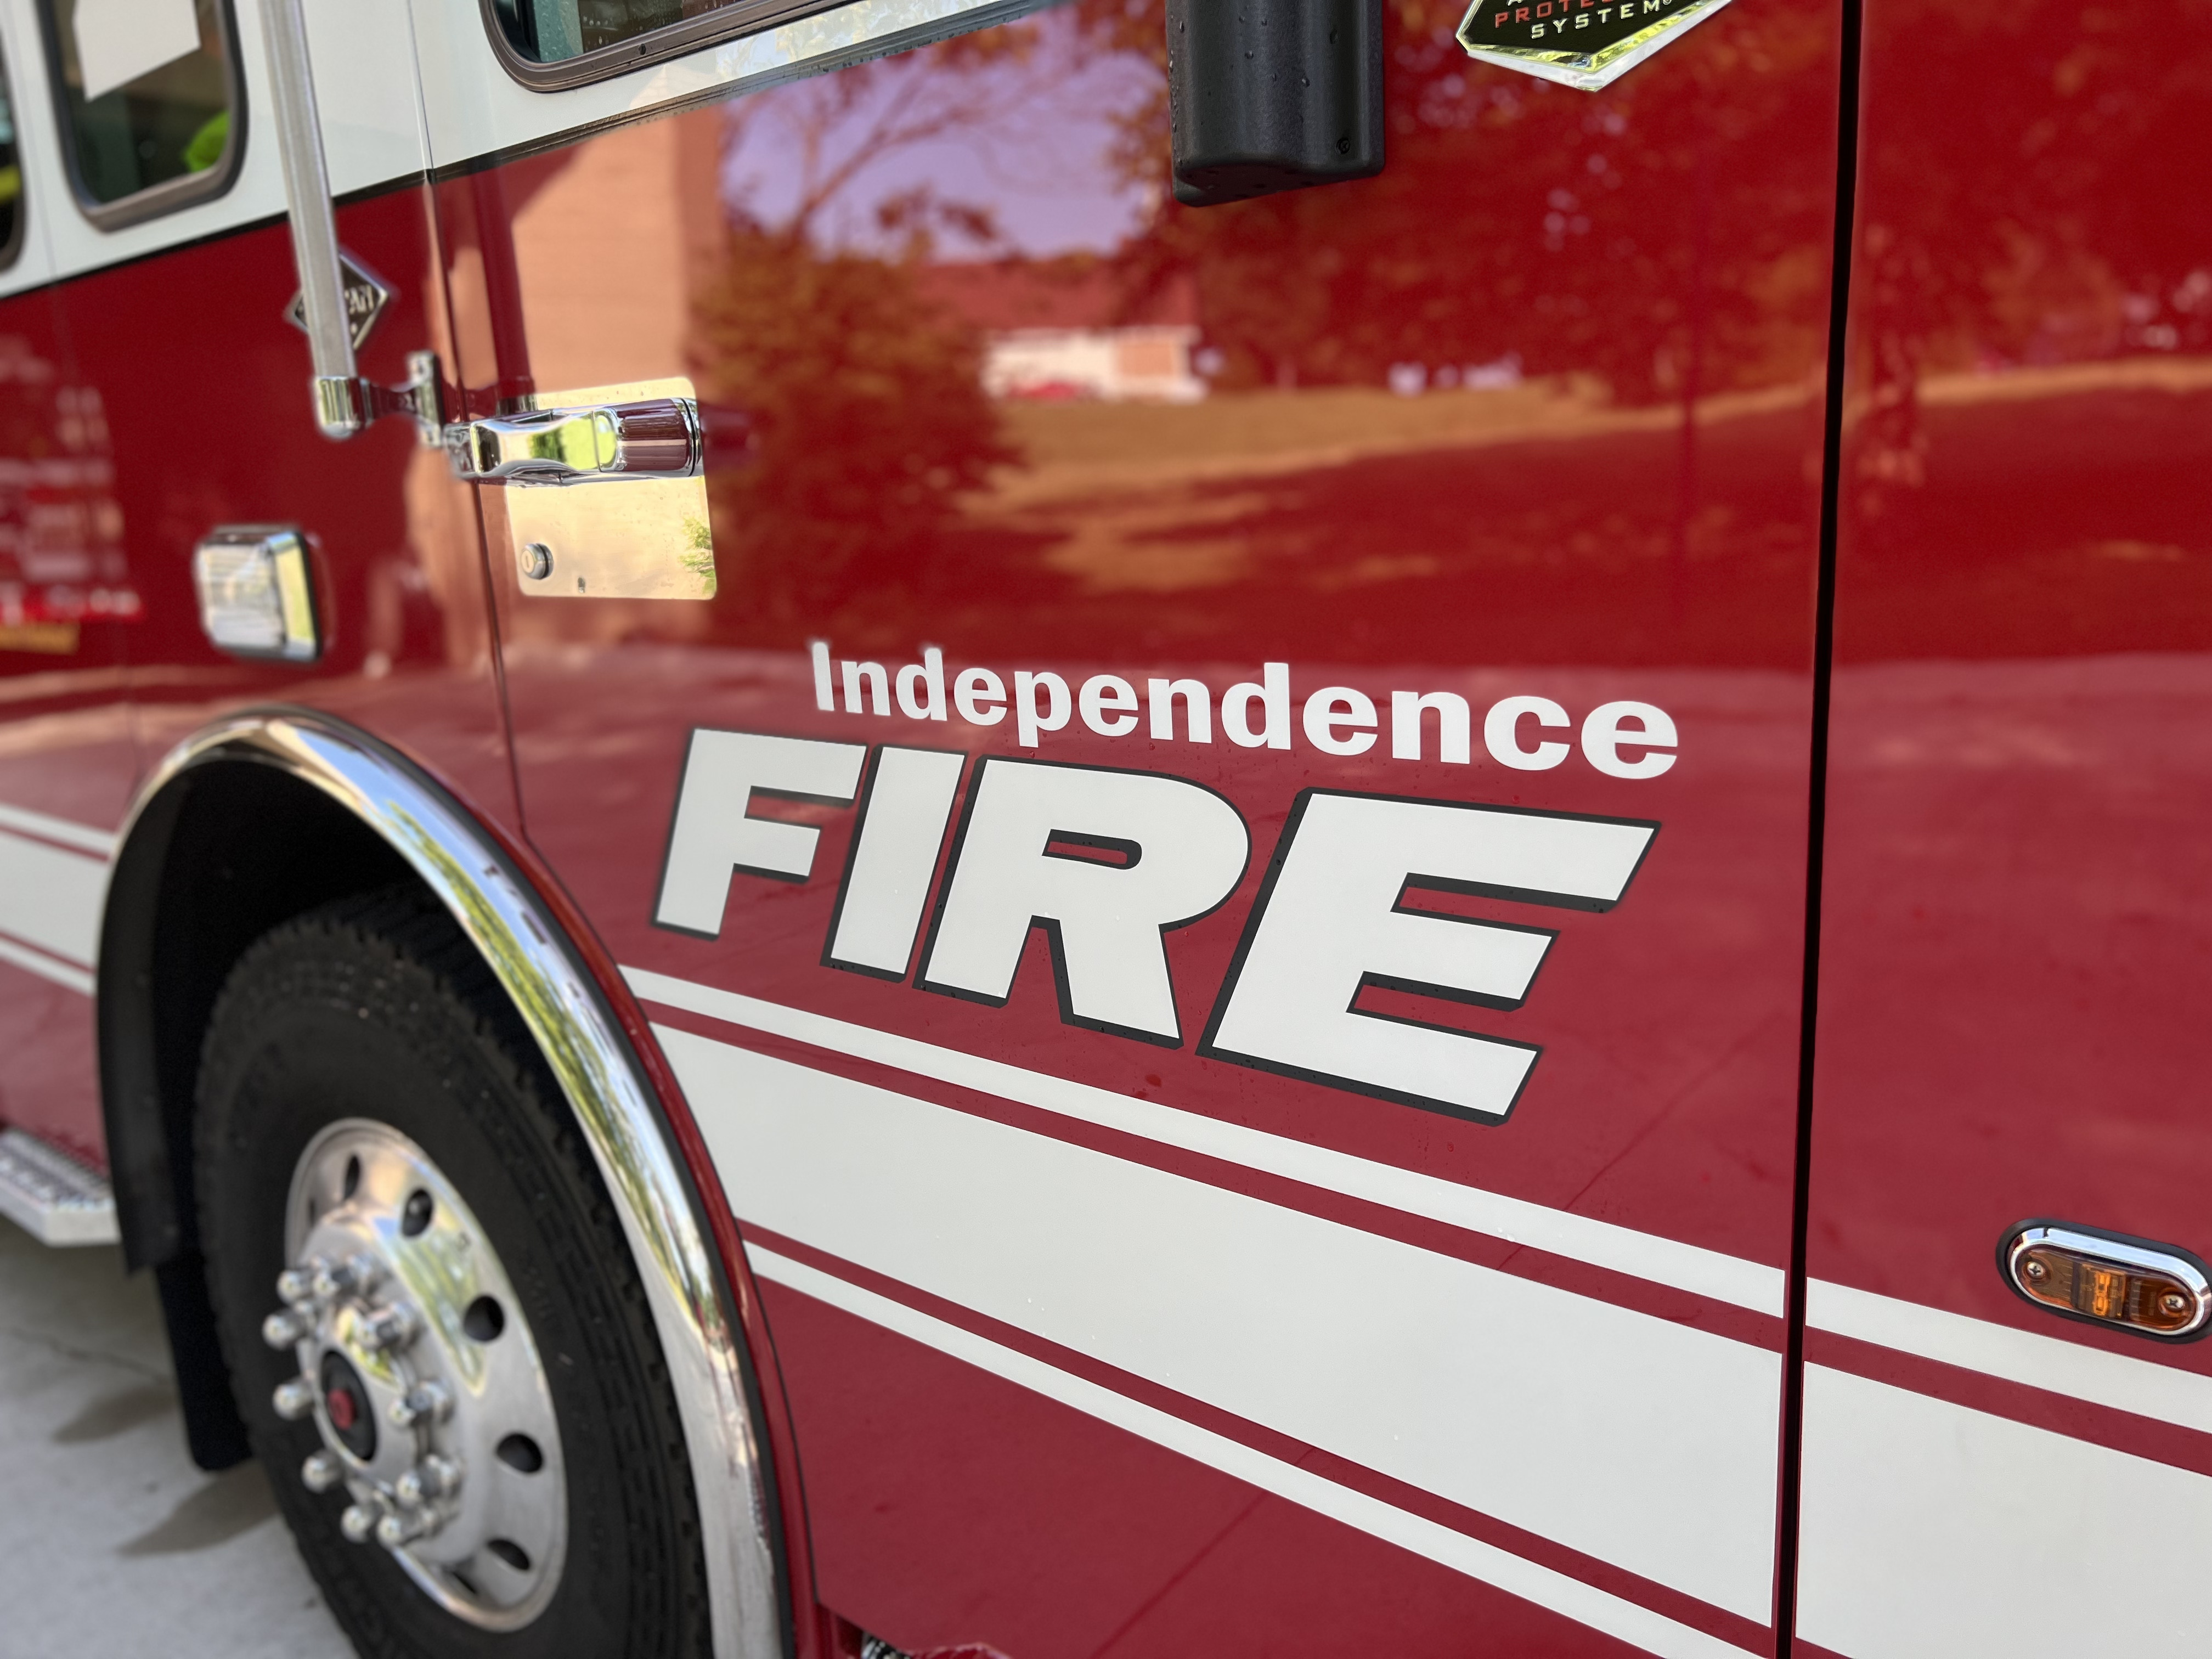 Independence Fire printed in white on the side of a red fire engine